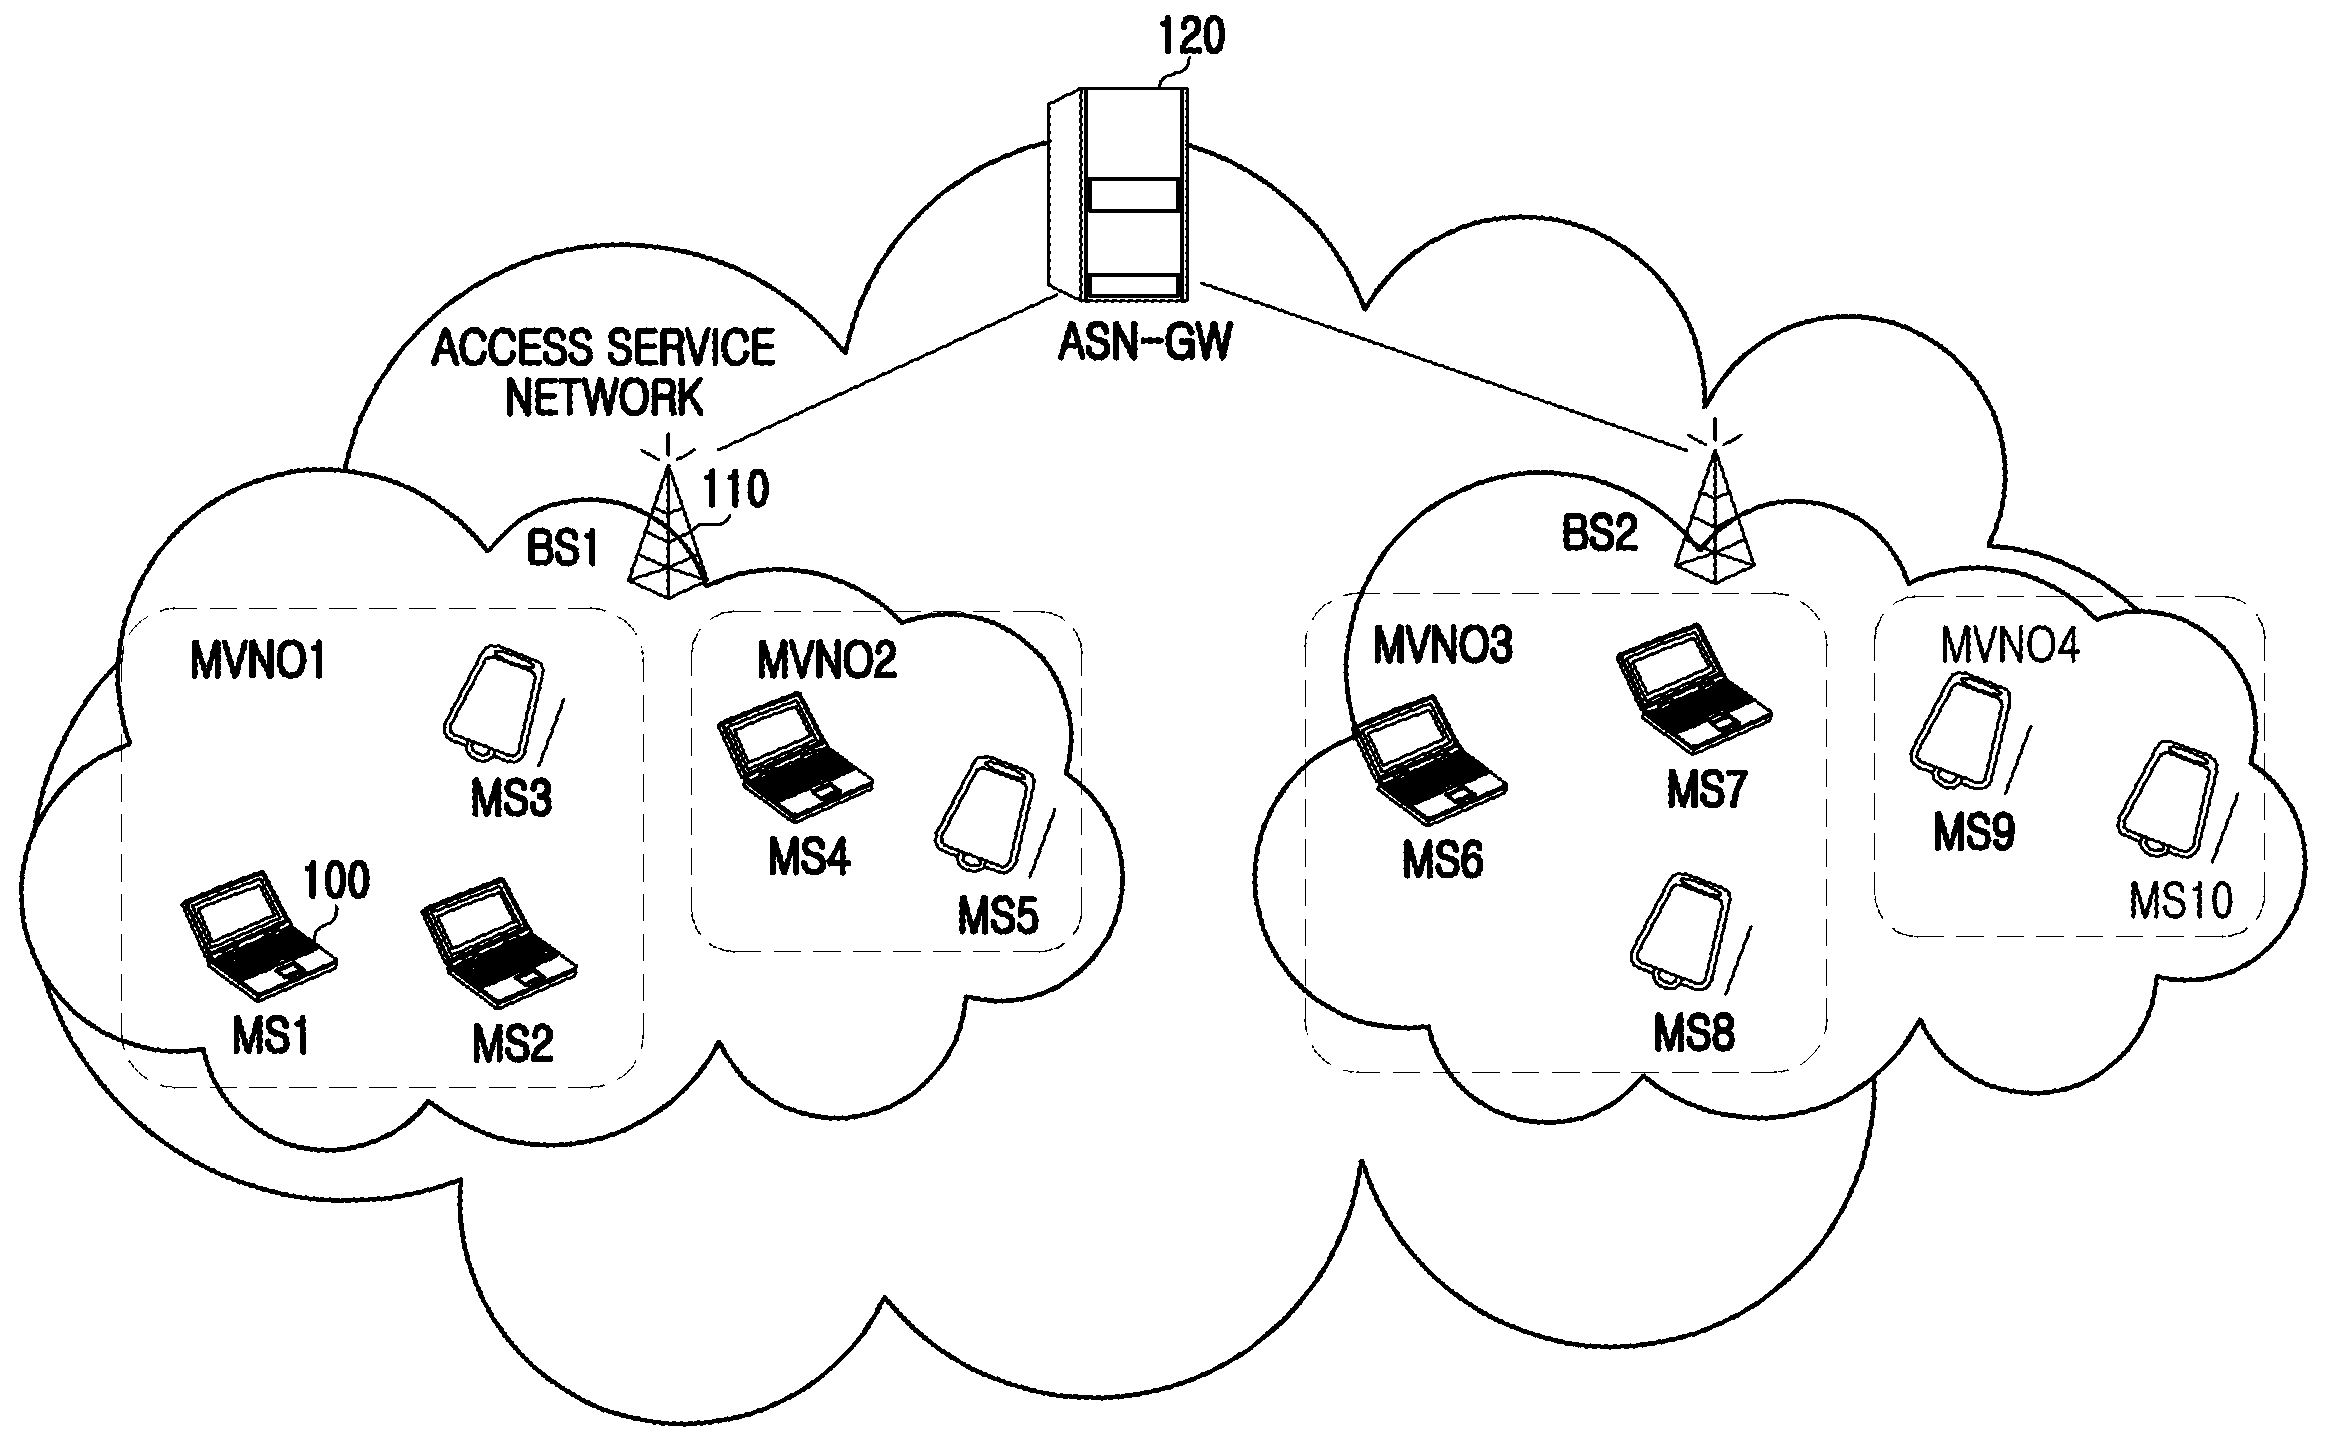 Scheduling apparatus and method for proportional resource allocation among mobile virtual network operators